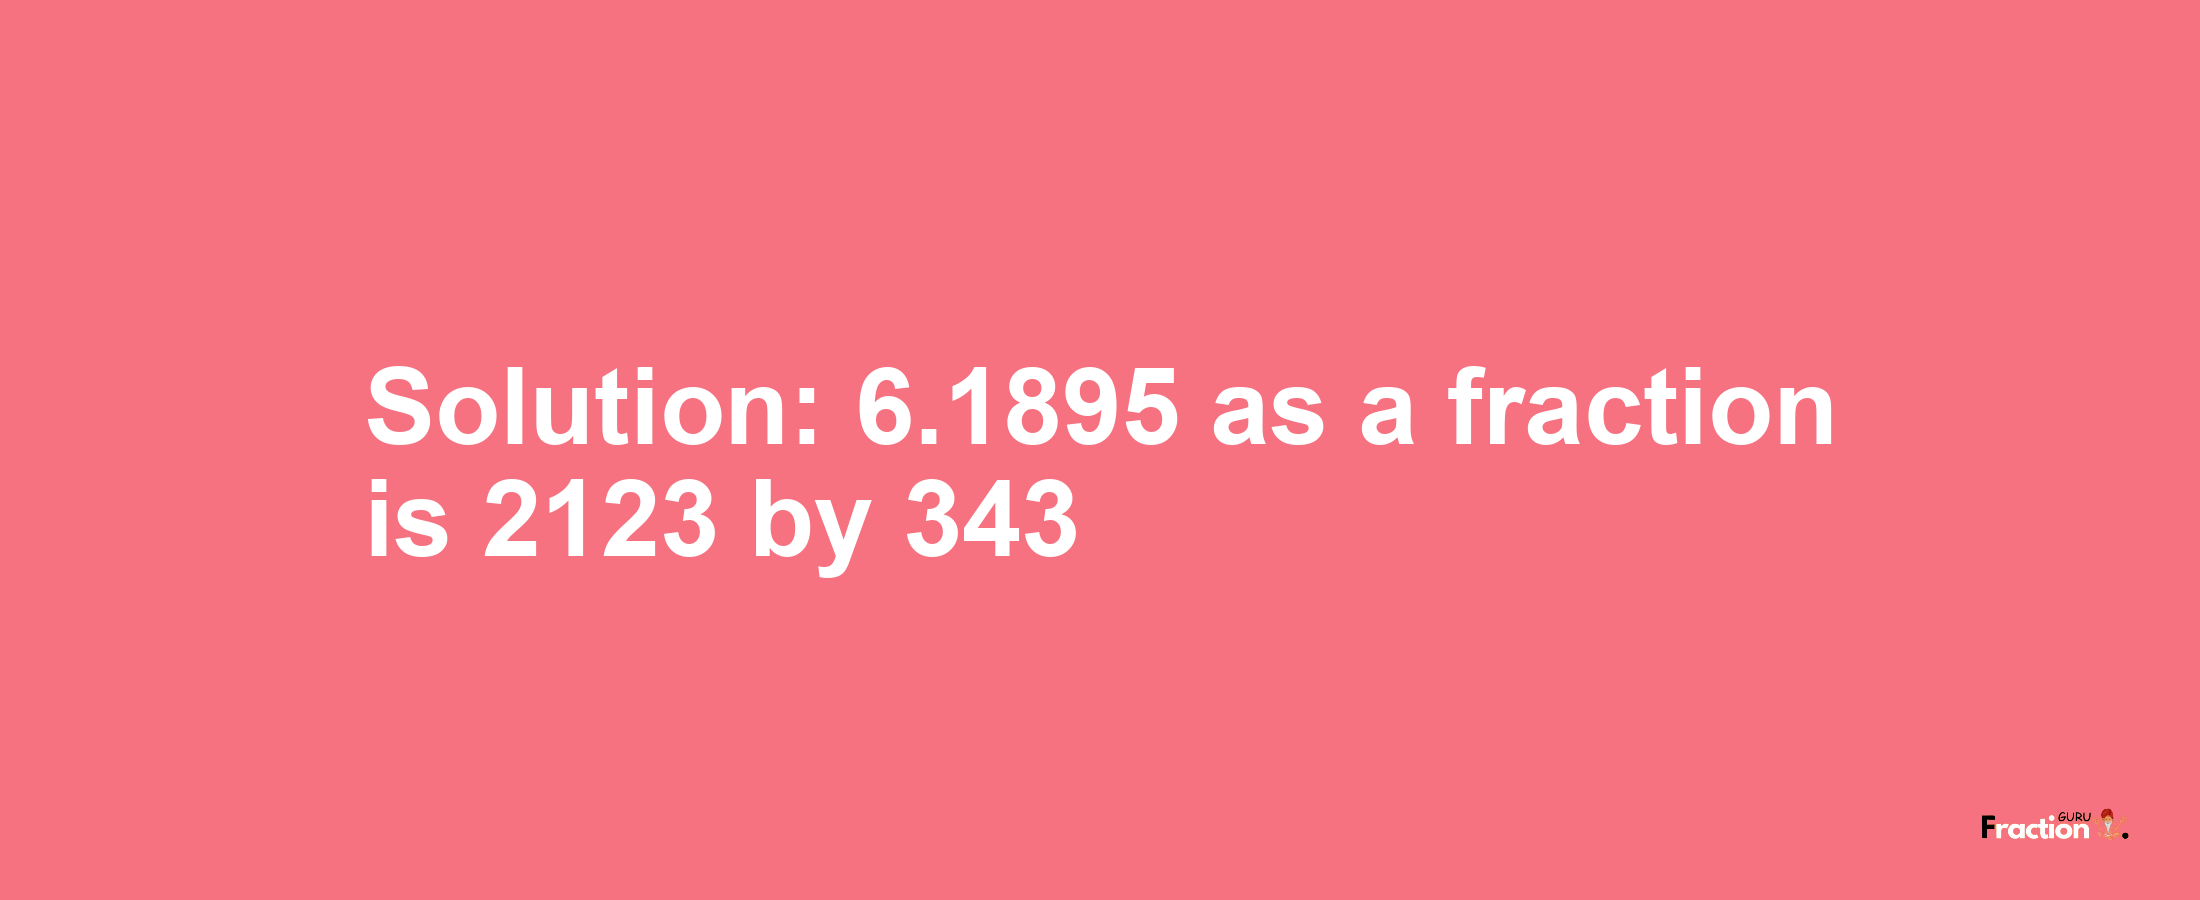 Solution:6.1895 as a fraction is 2123/343